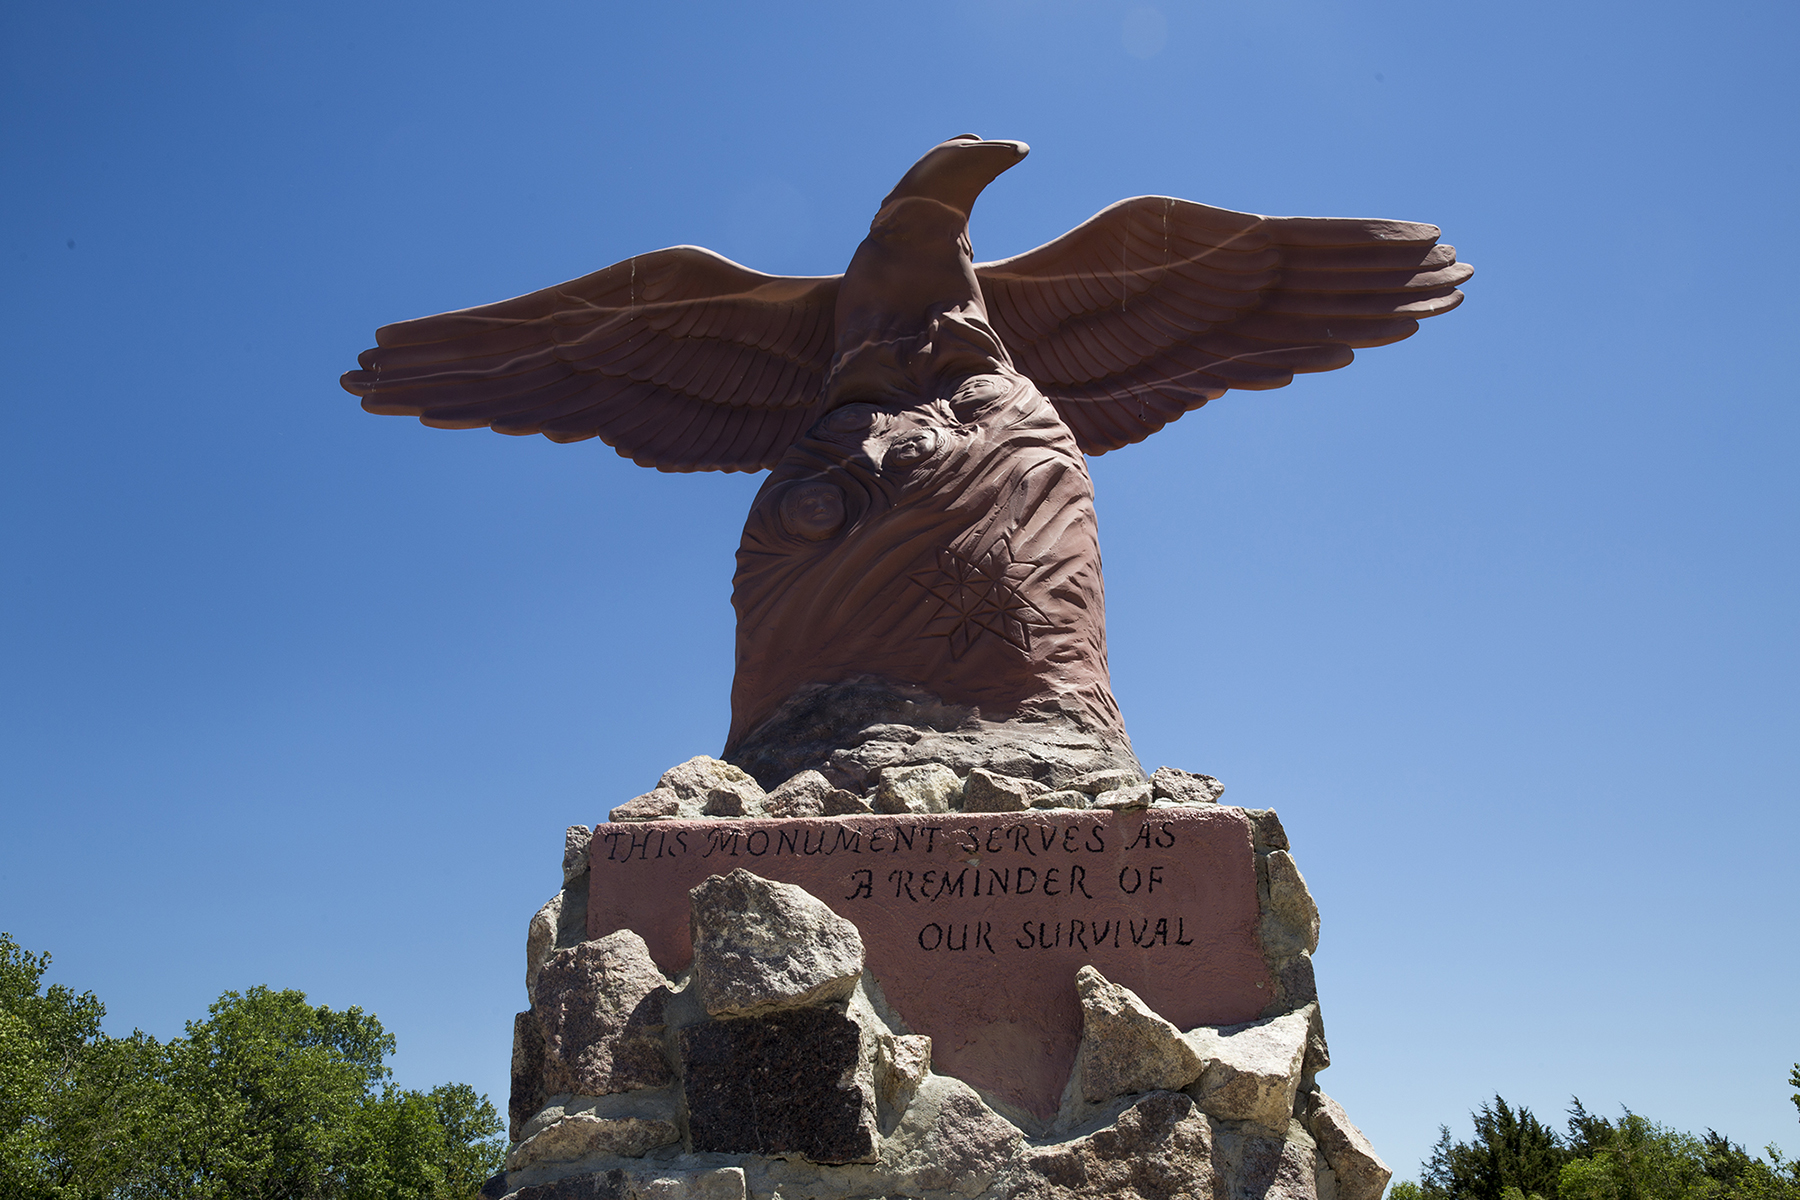 This monument commemorates the former Tekakwitha Orphanage on the Sisseton Wahpeton Oyate Reservation in South Dakota, where children were separated from their families. It closed about 30 years ago. (Mike Lakusiak/News21)